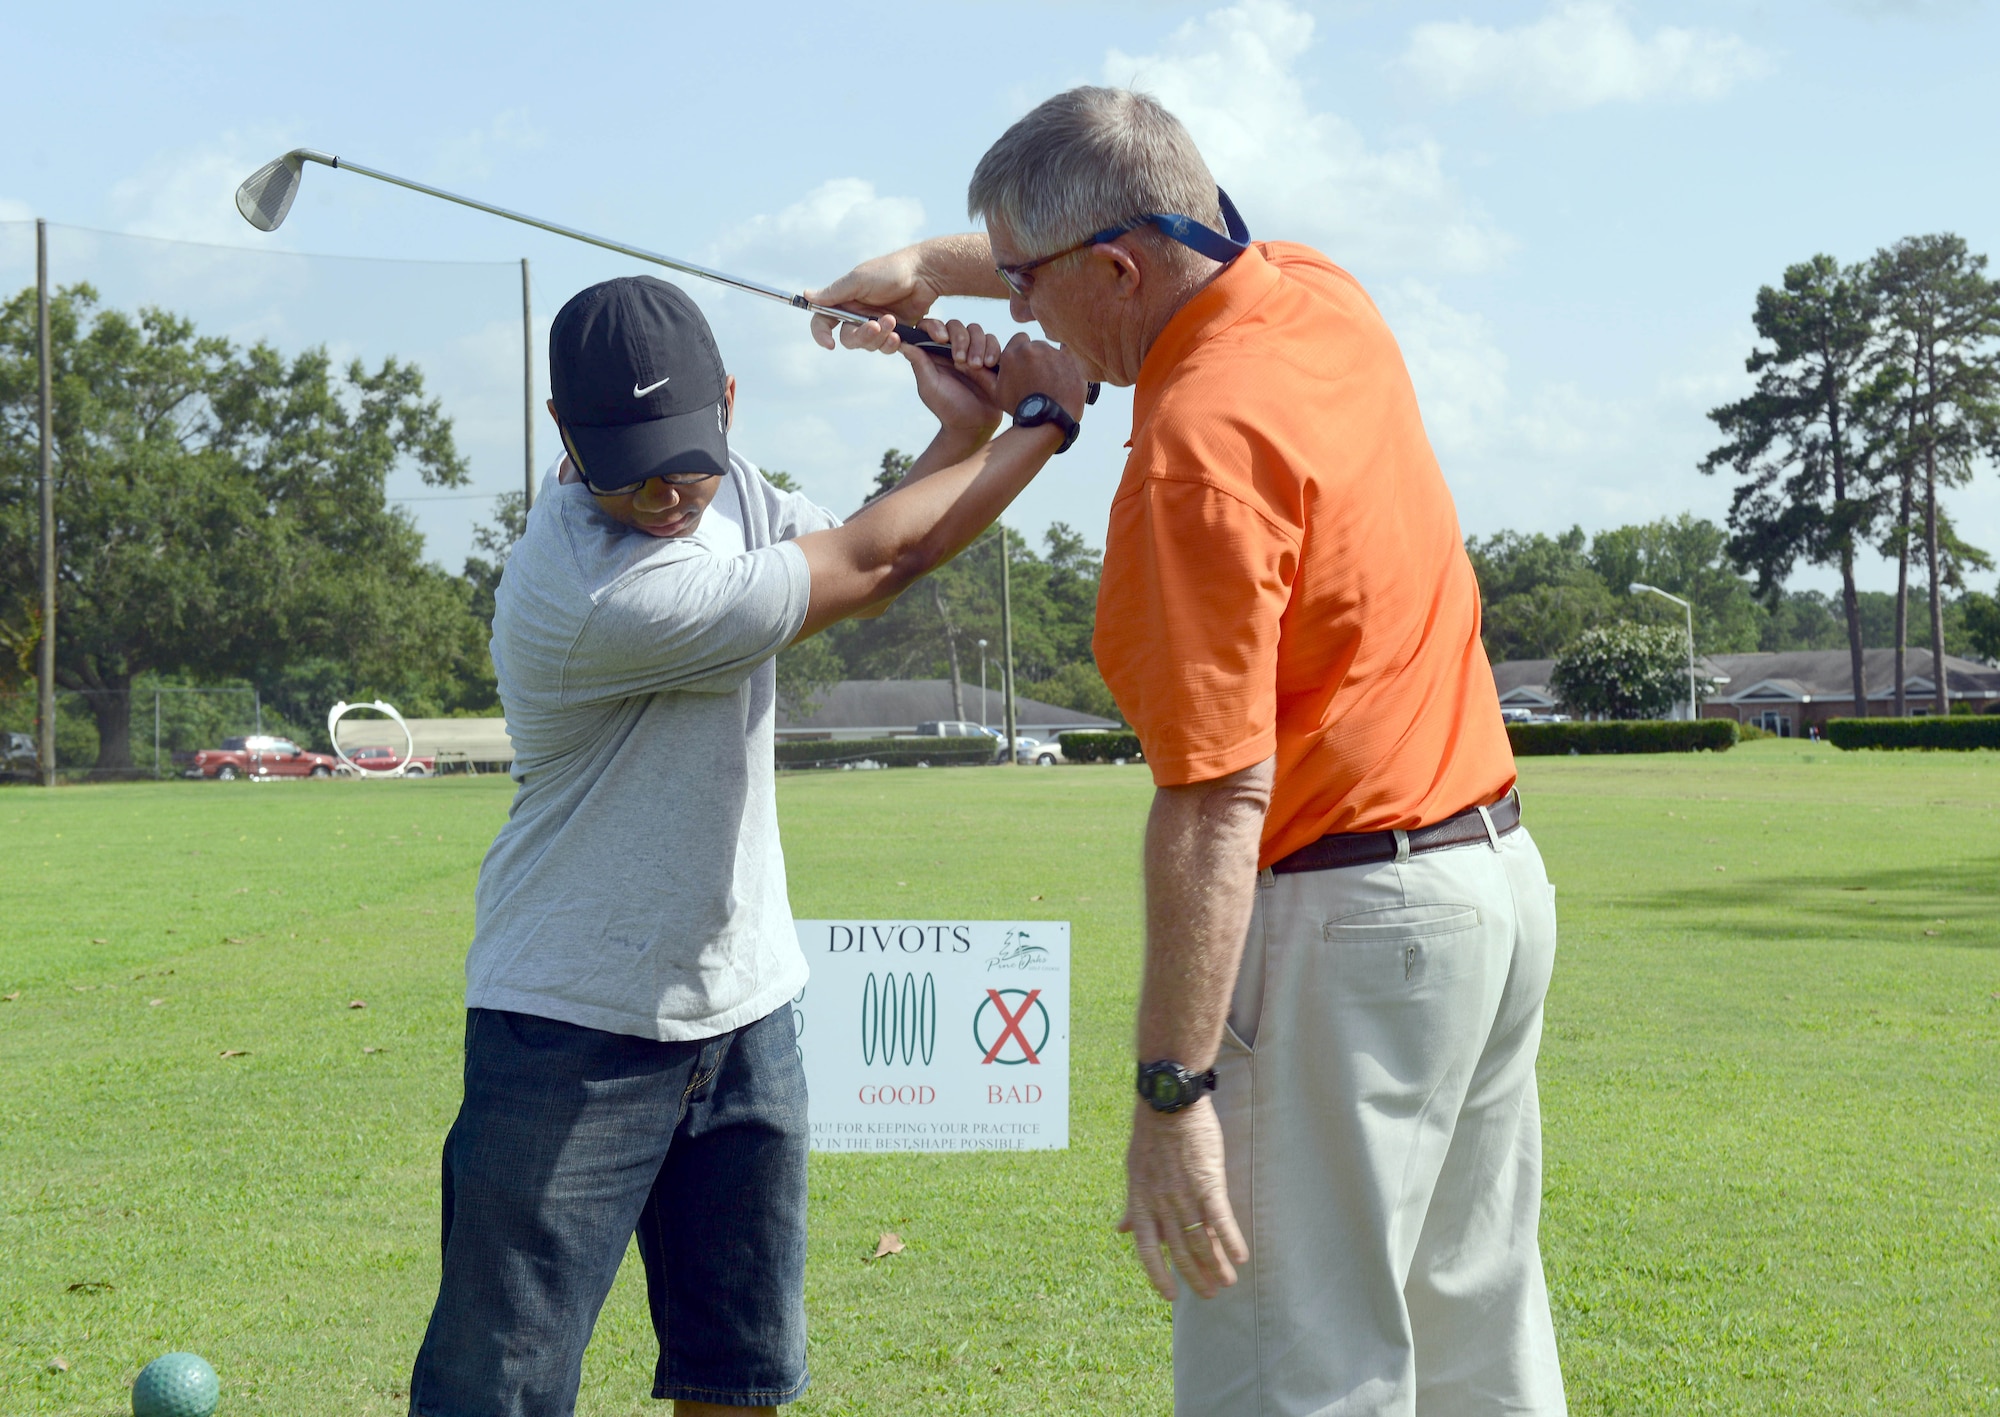 Daniel Brewer, 5th Combat Communications Support Squadron vehicle maintenance technician, receives golf tips from Mike Baker, Pine Oaks Golf Course manager. The facility offers “Tips from the Pro” on Tuesdays from 5 to 6 p.m. (U.S. Air Force photo by Tommie Horton)